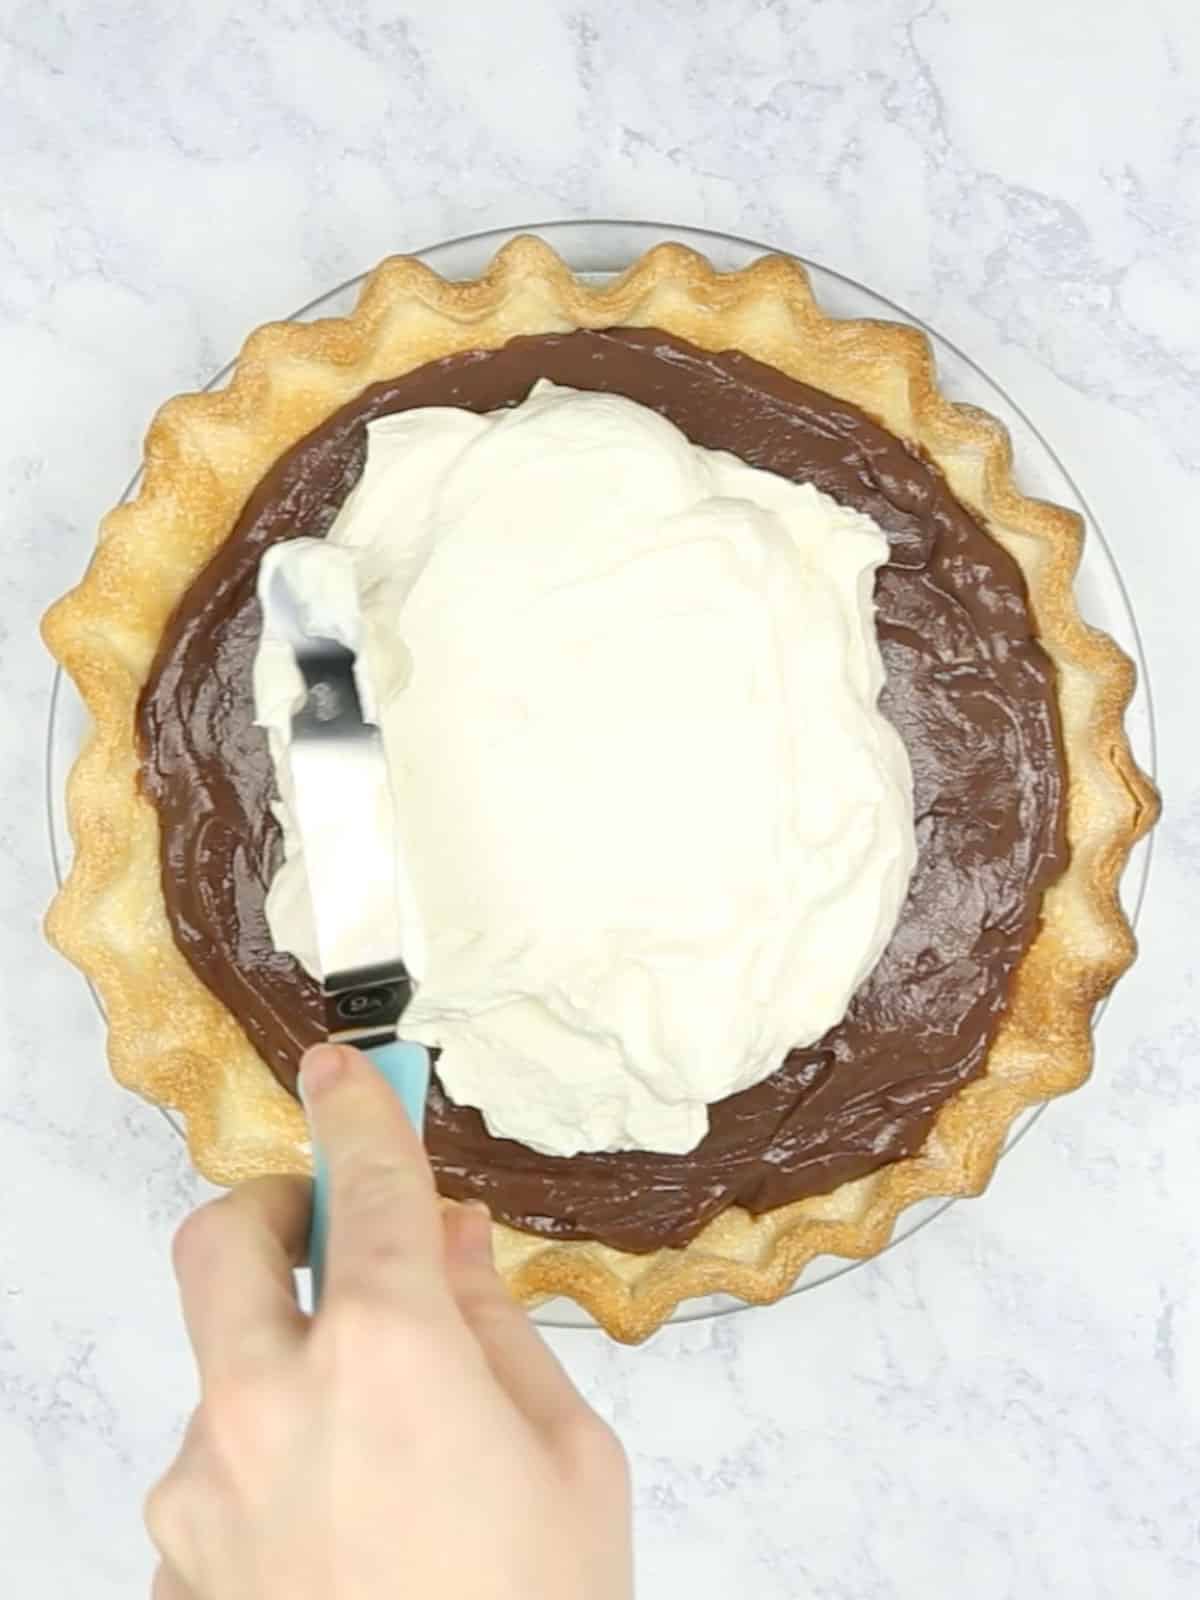 Whipped cream being spread onto the chocolate pie.